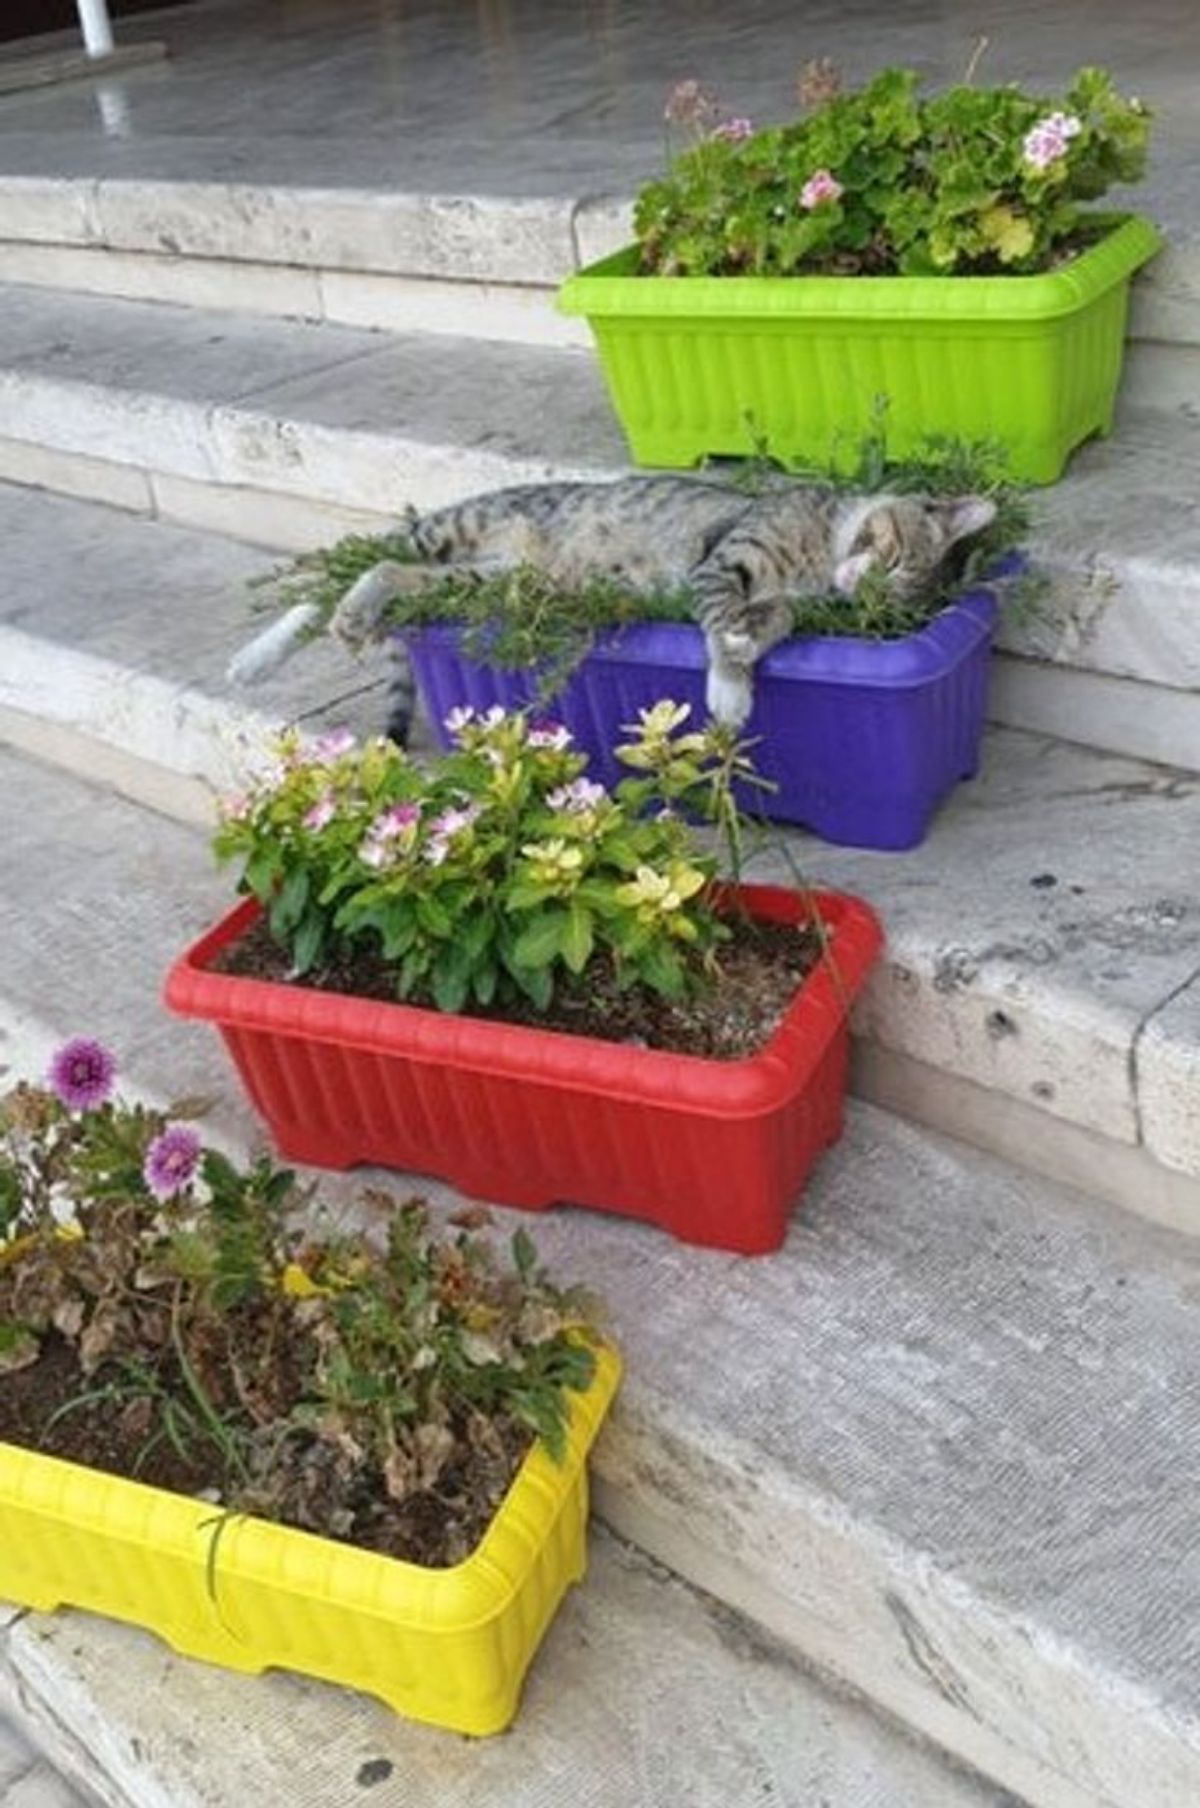 4 rectangular flower pots placed on stairs with a grey and white tabby sleeping on one